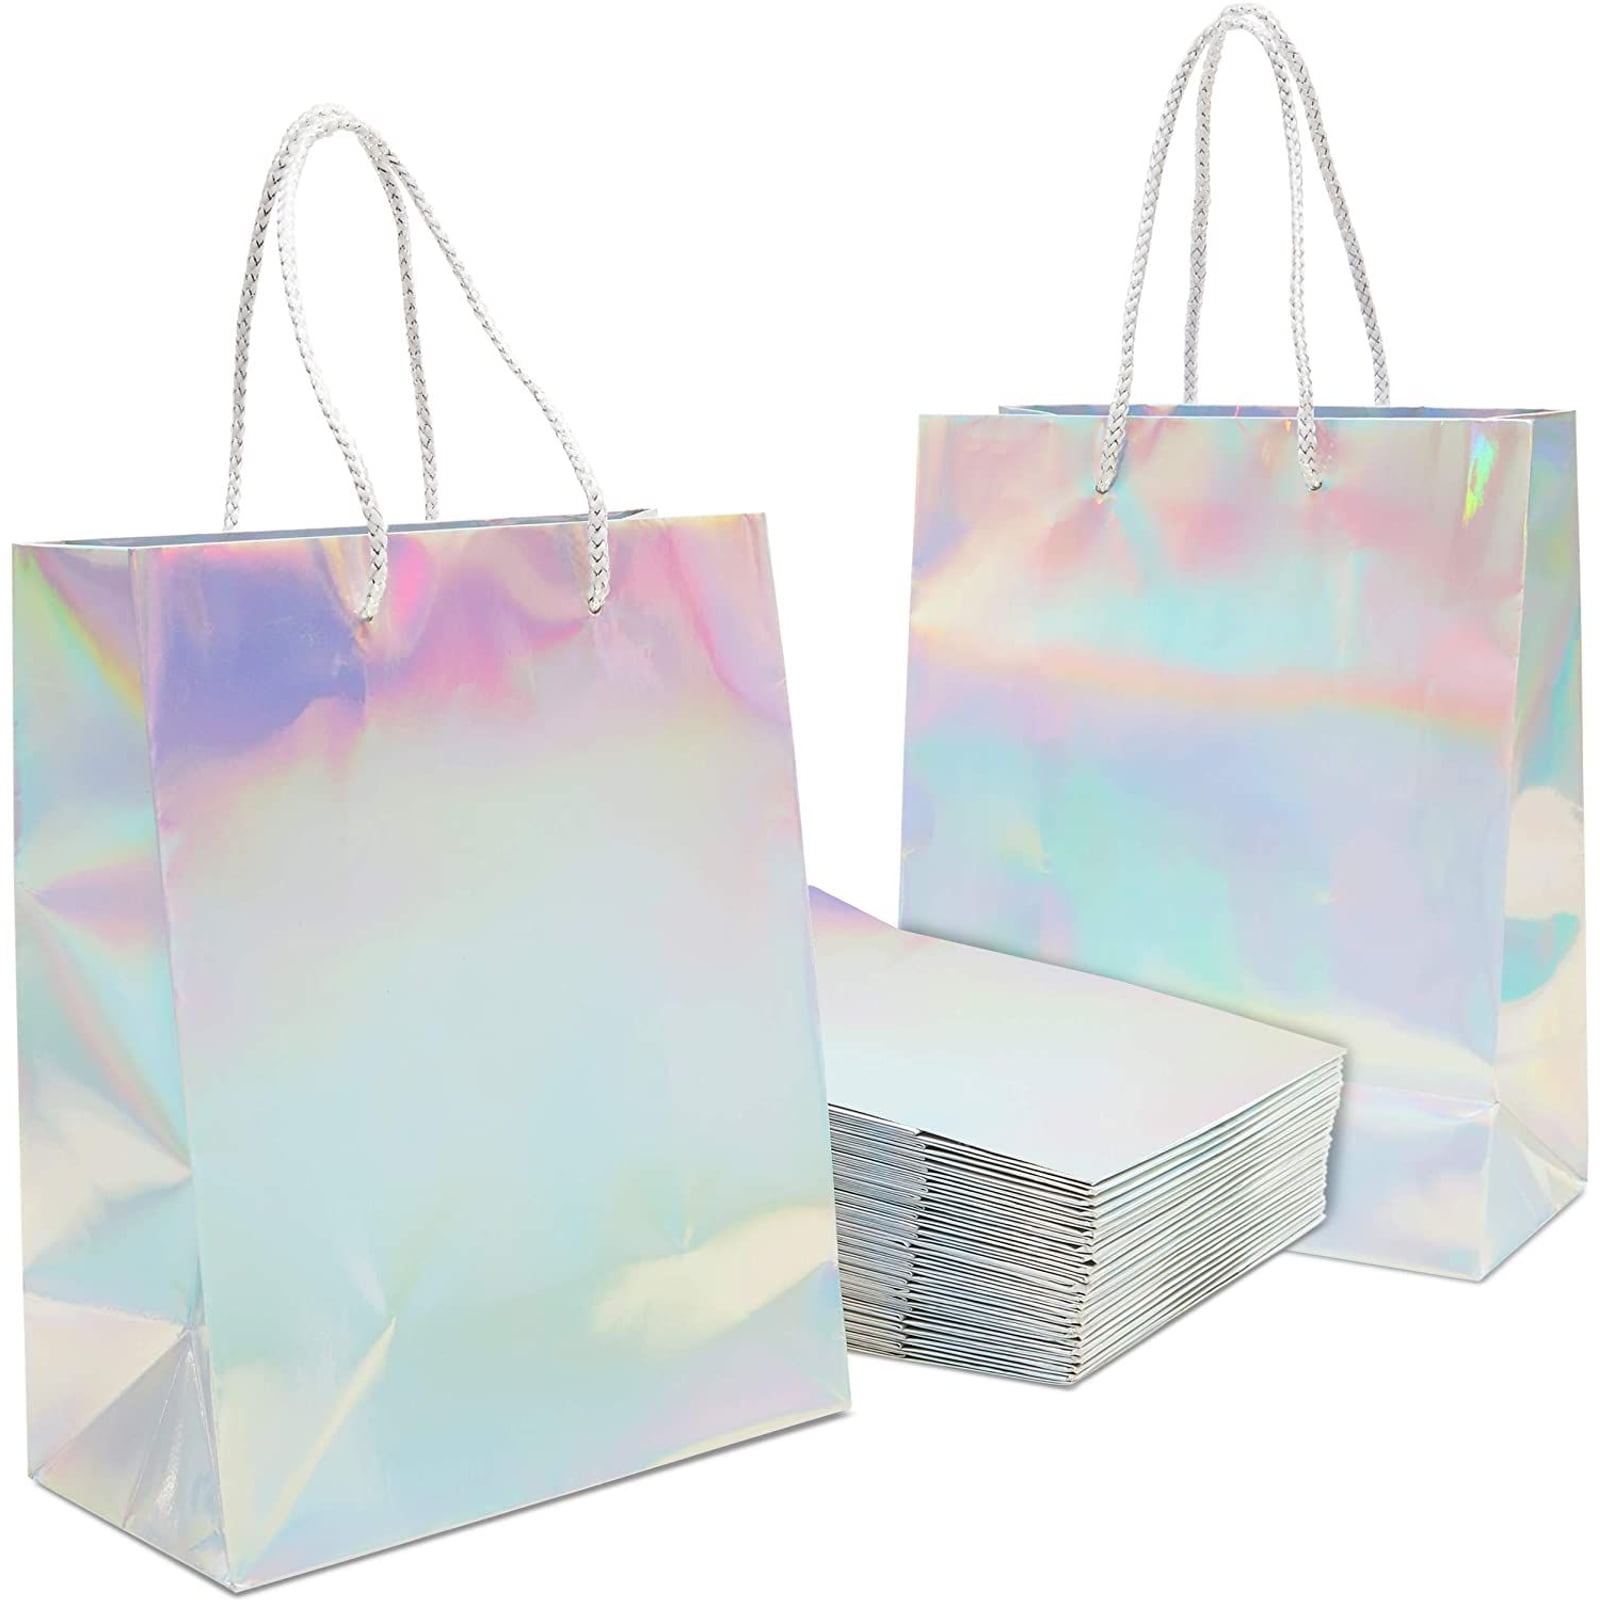 12 piece Hologram Gift Bags Large 